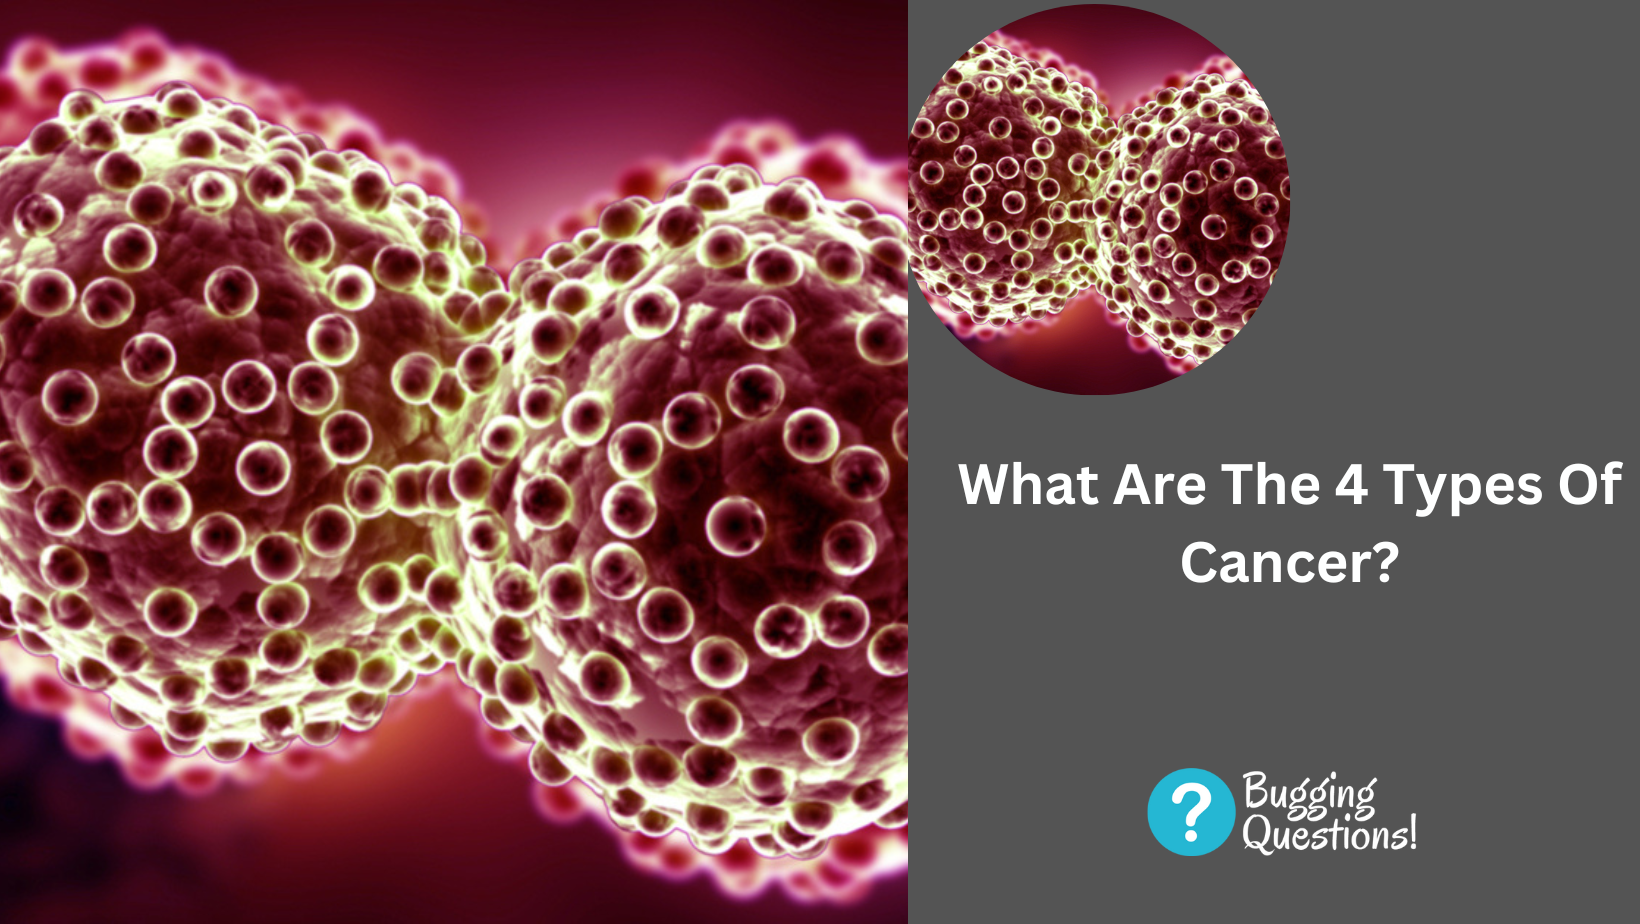 What Are The 4 Types Of Cancer?